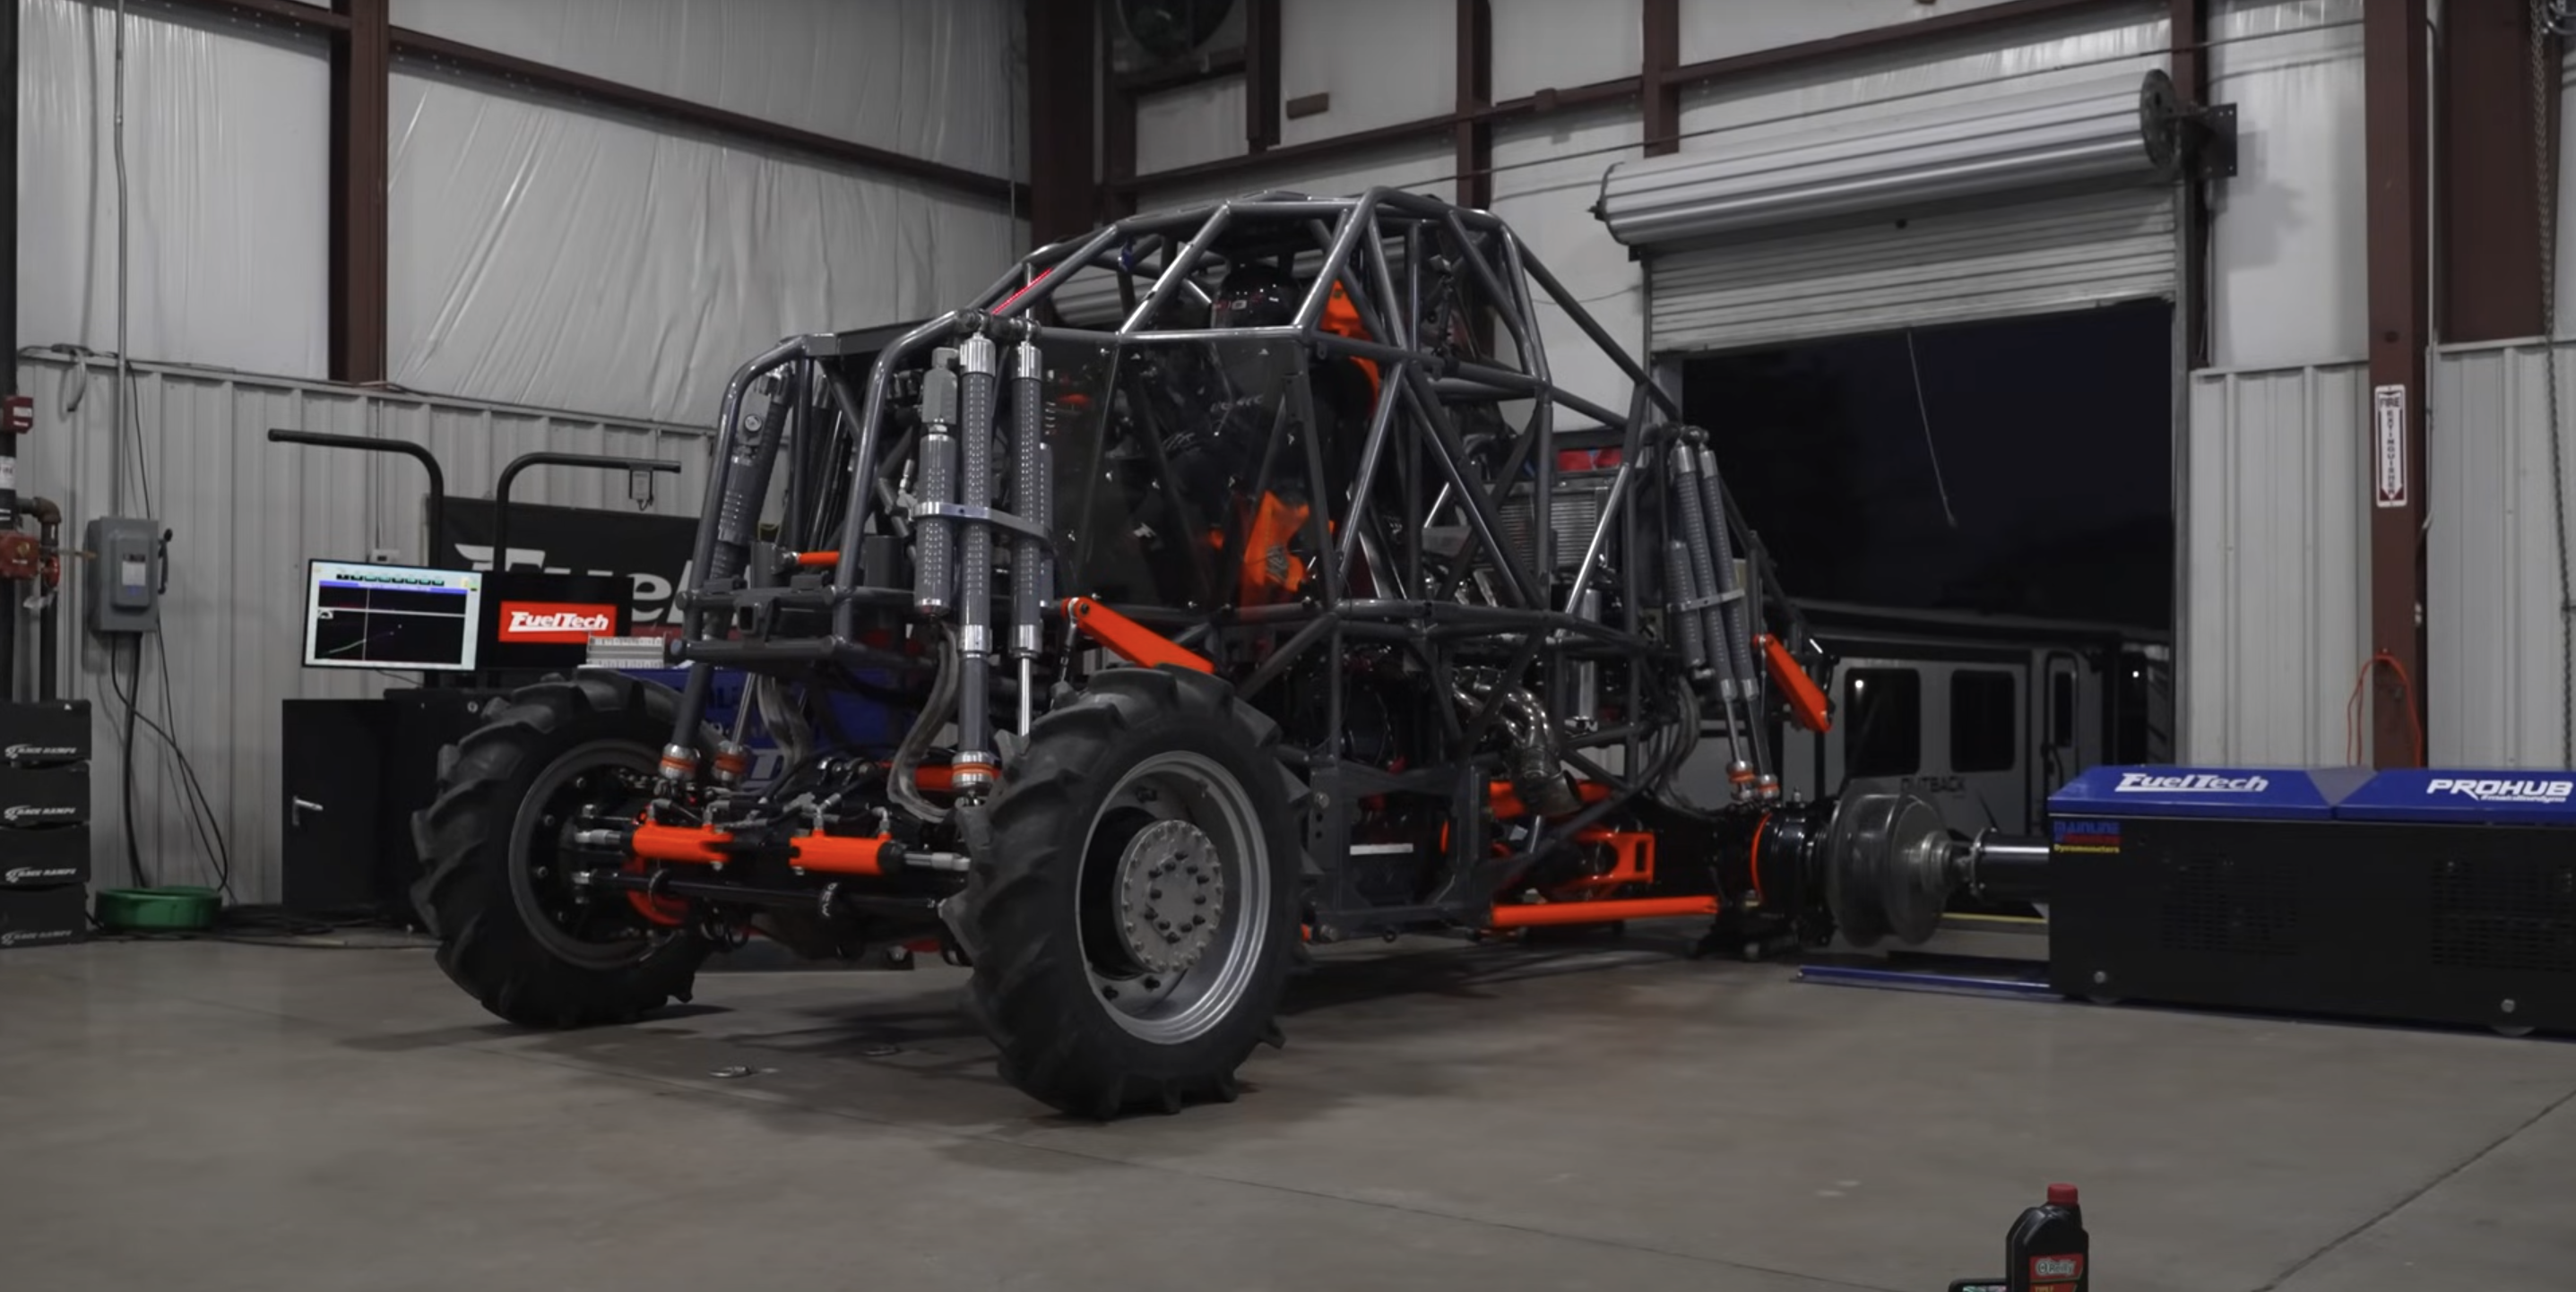 I Bet You've Never Seen a Monster Truck on a Dyno